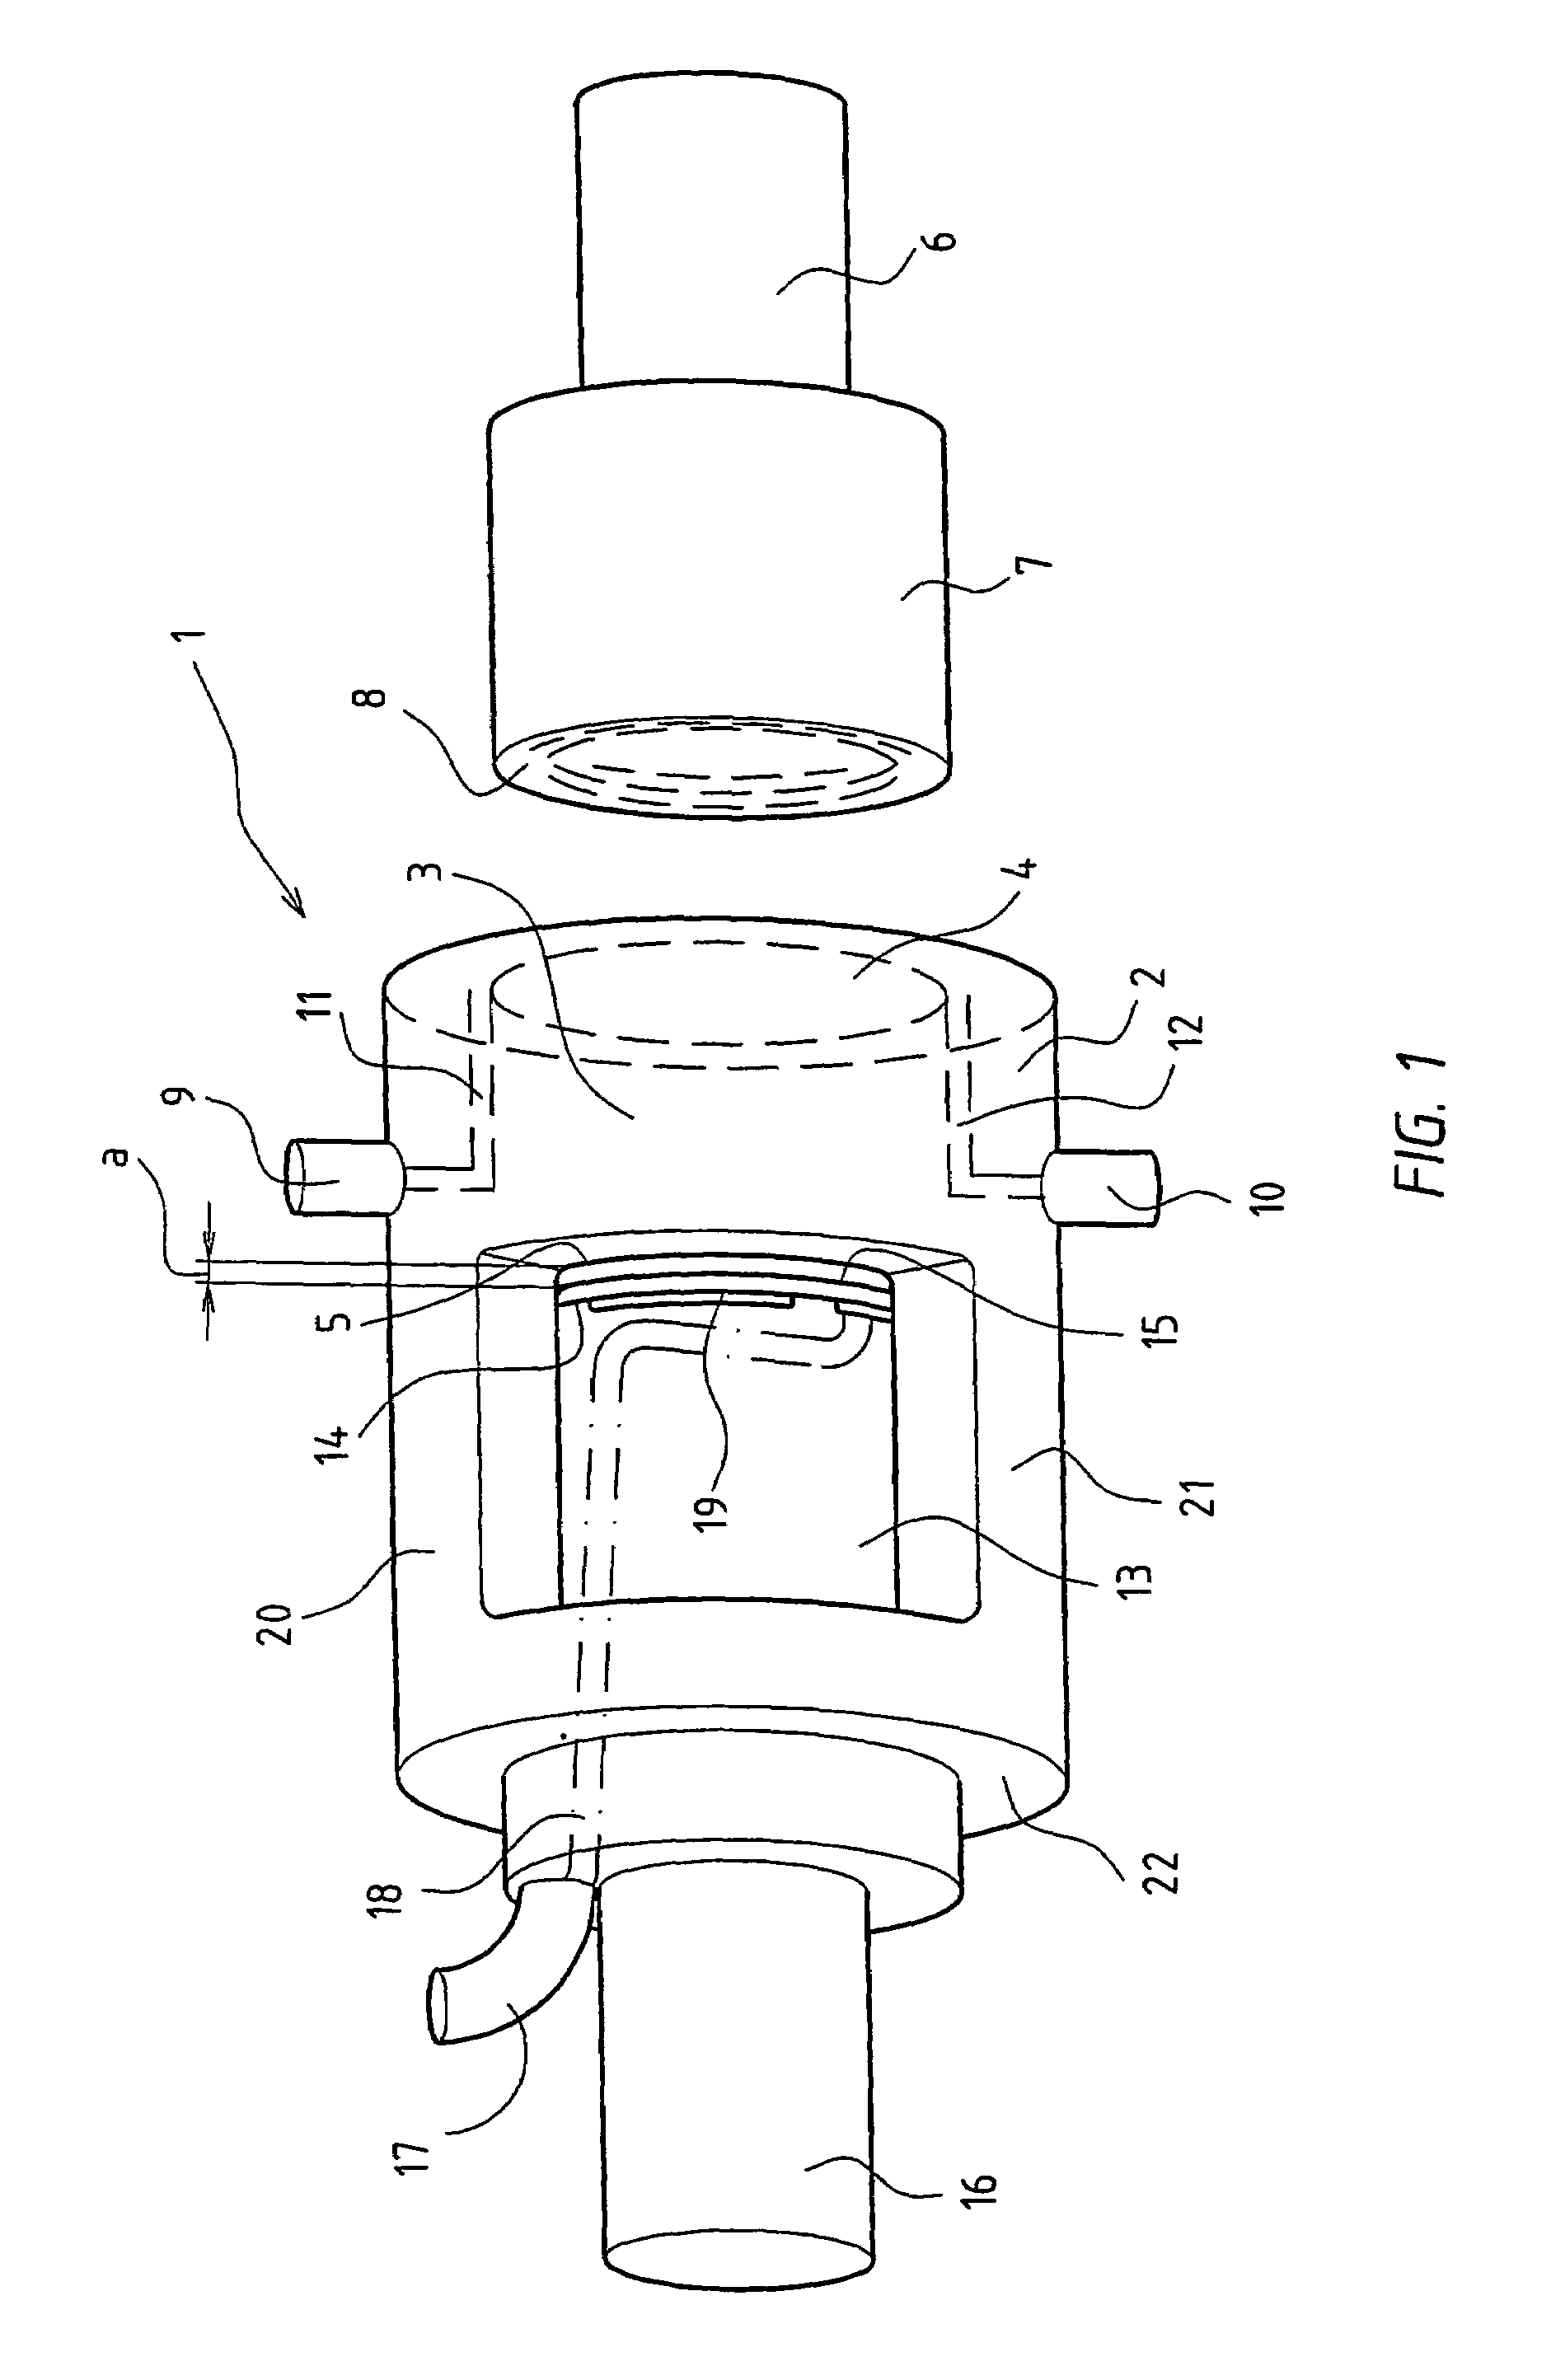 Device and method for separating meat from bone parts